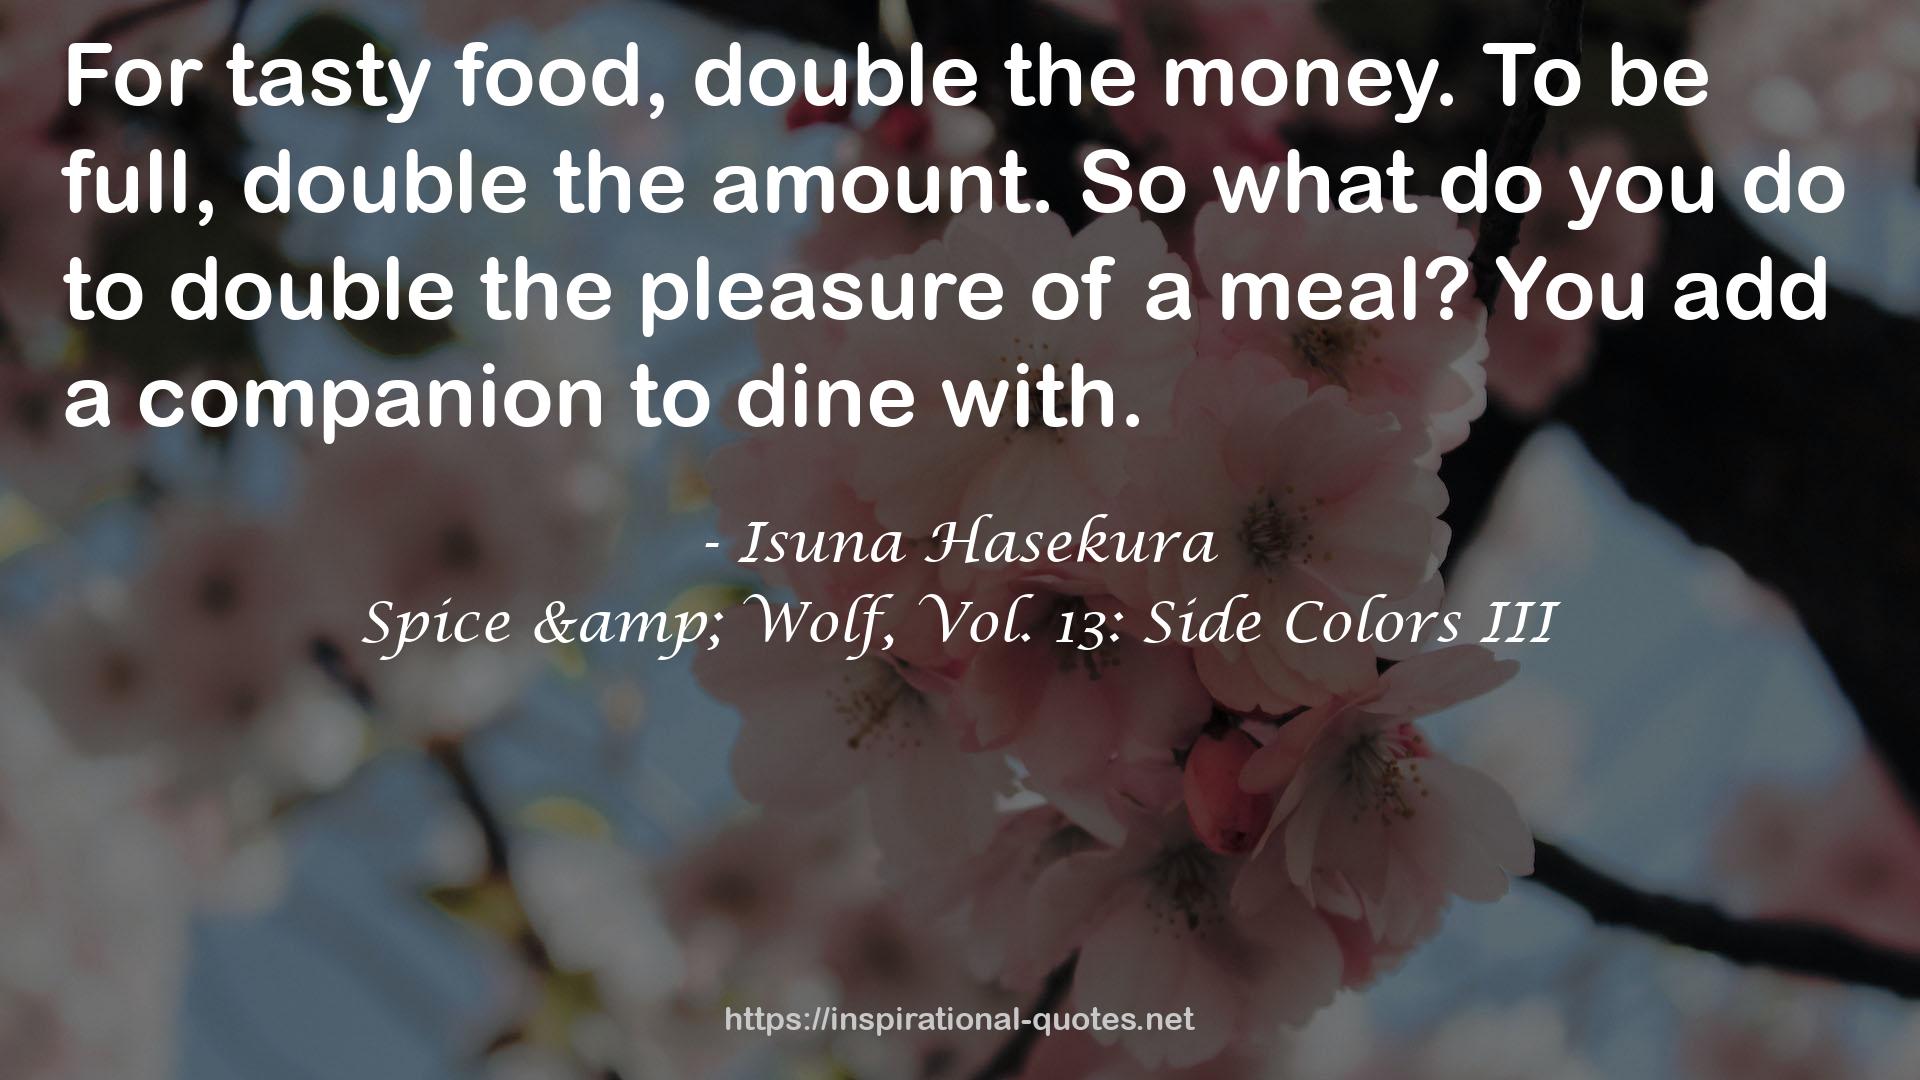 Spice & Wolf, Vol. 13: Side Colors III QUOTES